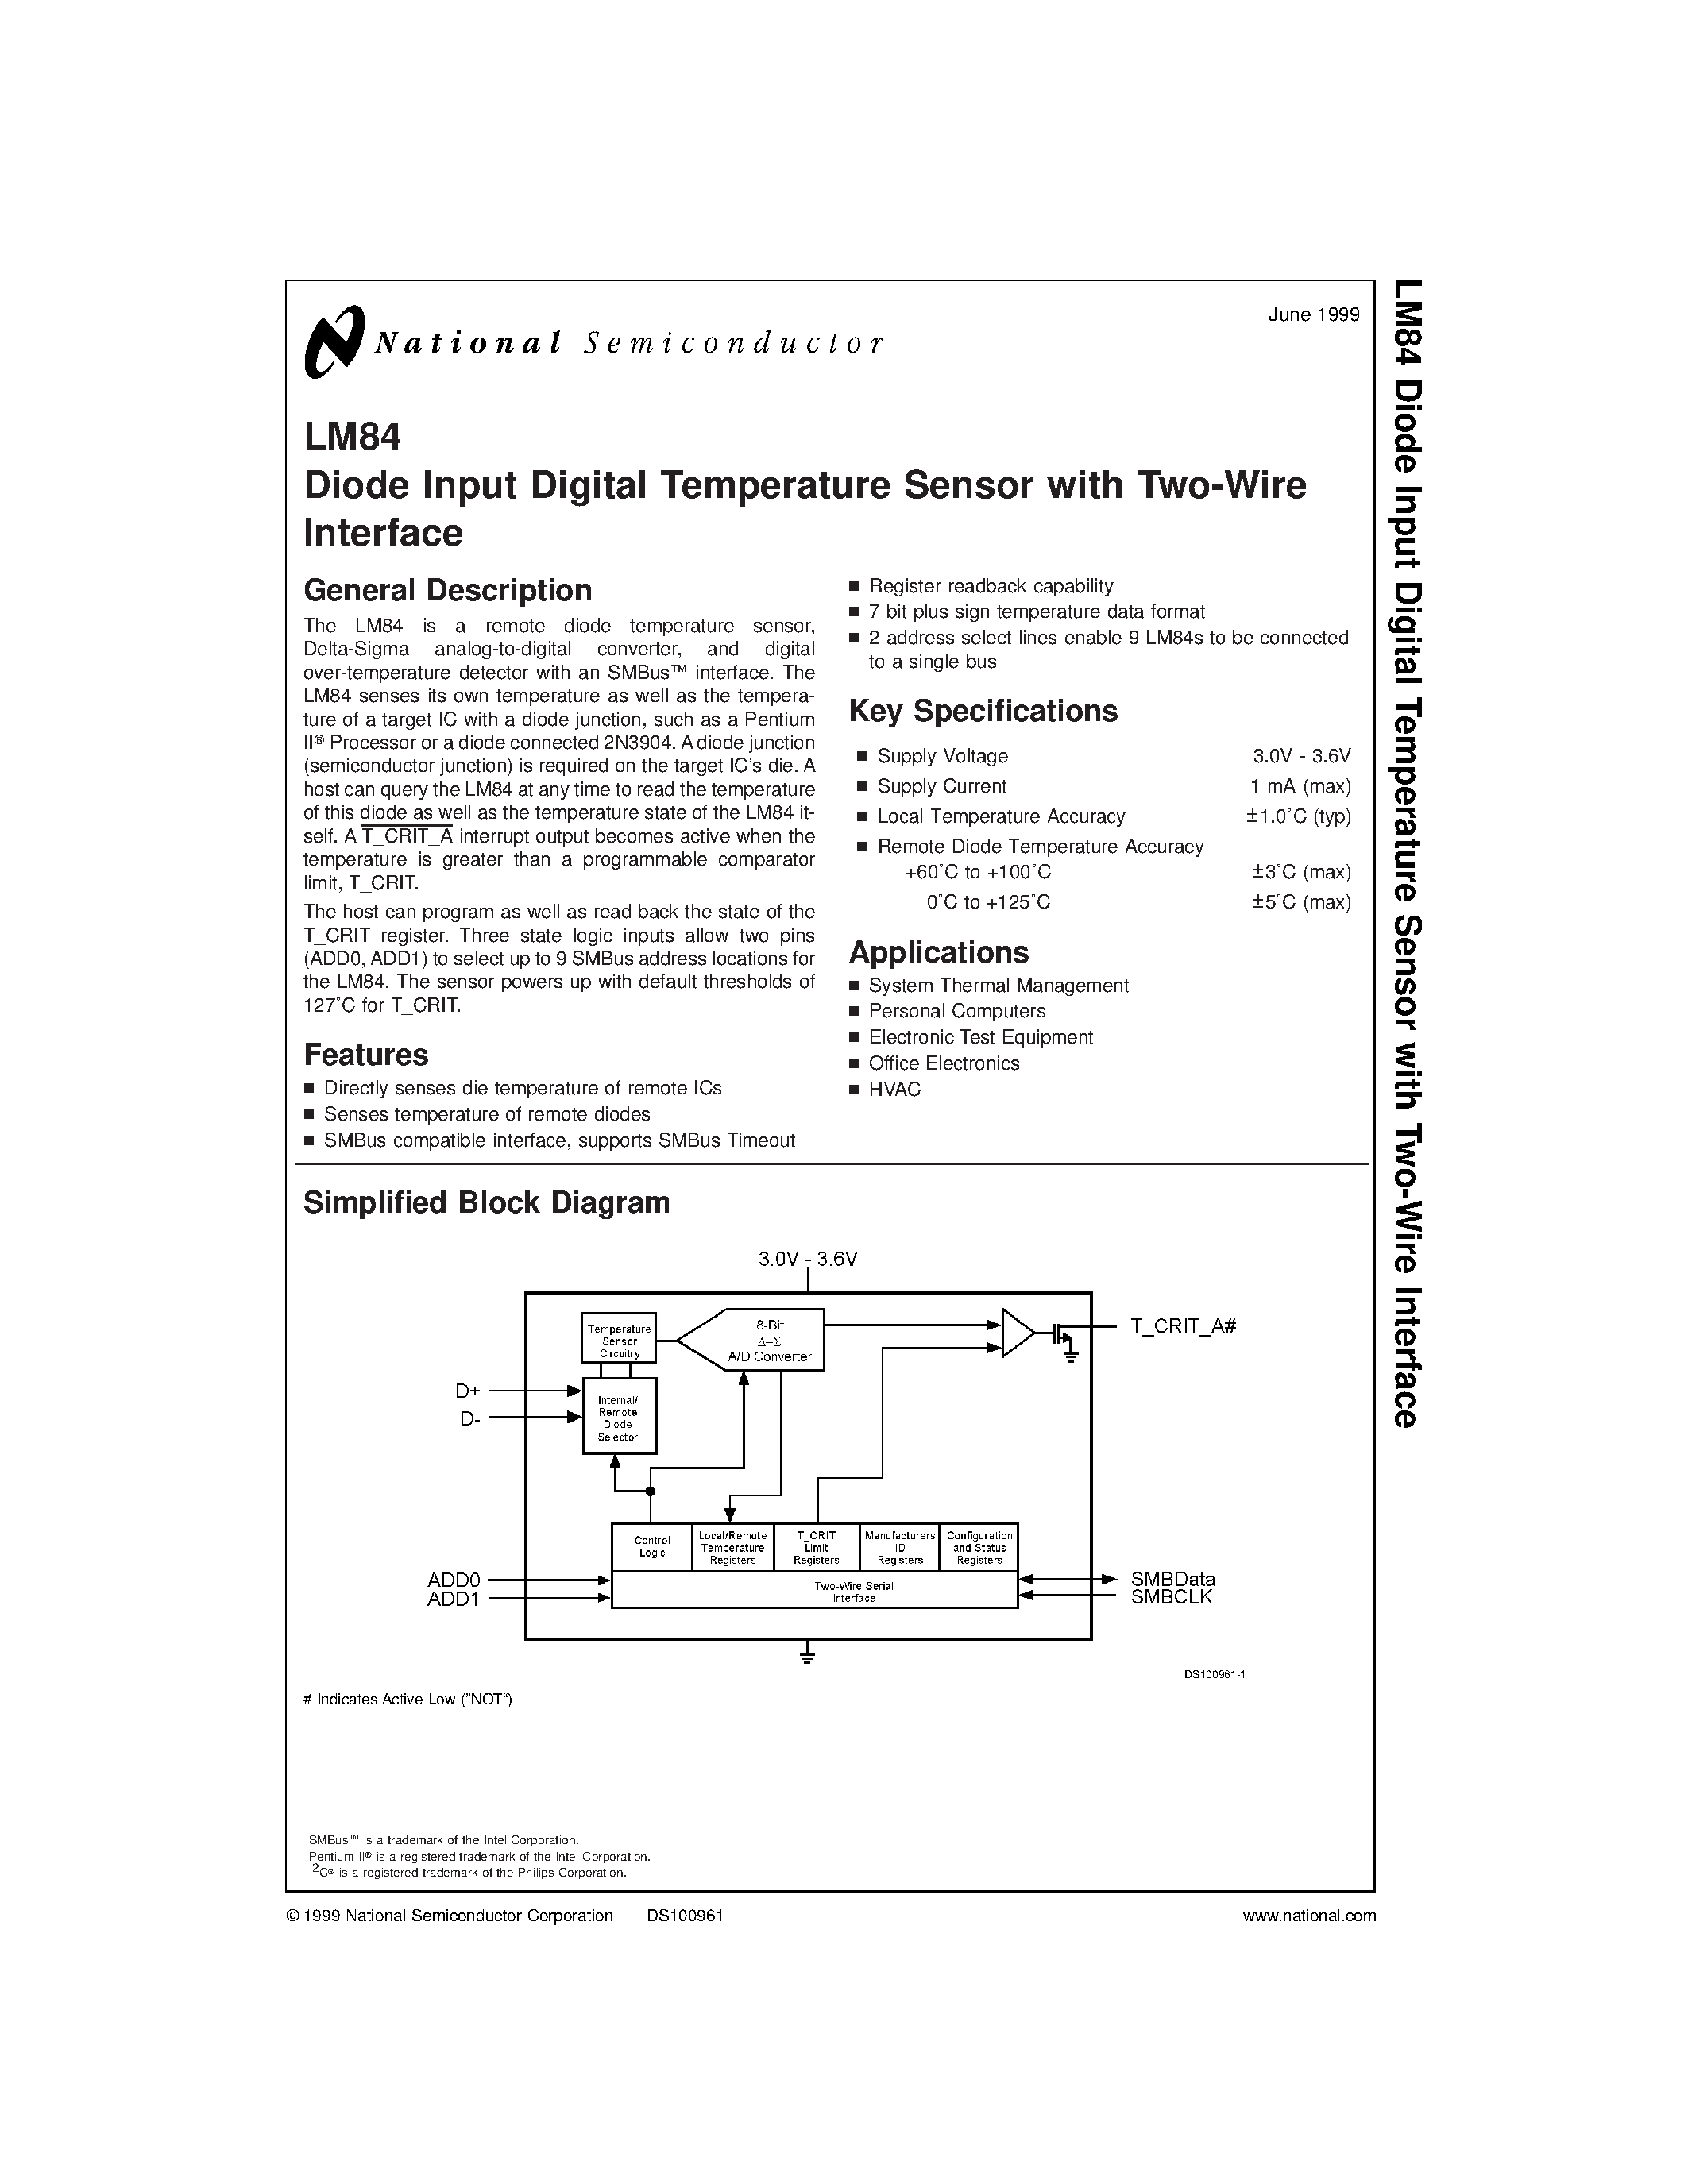 Datasheet LM84CIMQAX - Diode Input Digital Temperature Sensor with Two-Wire Interface page 1